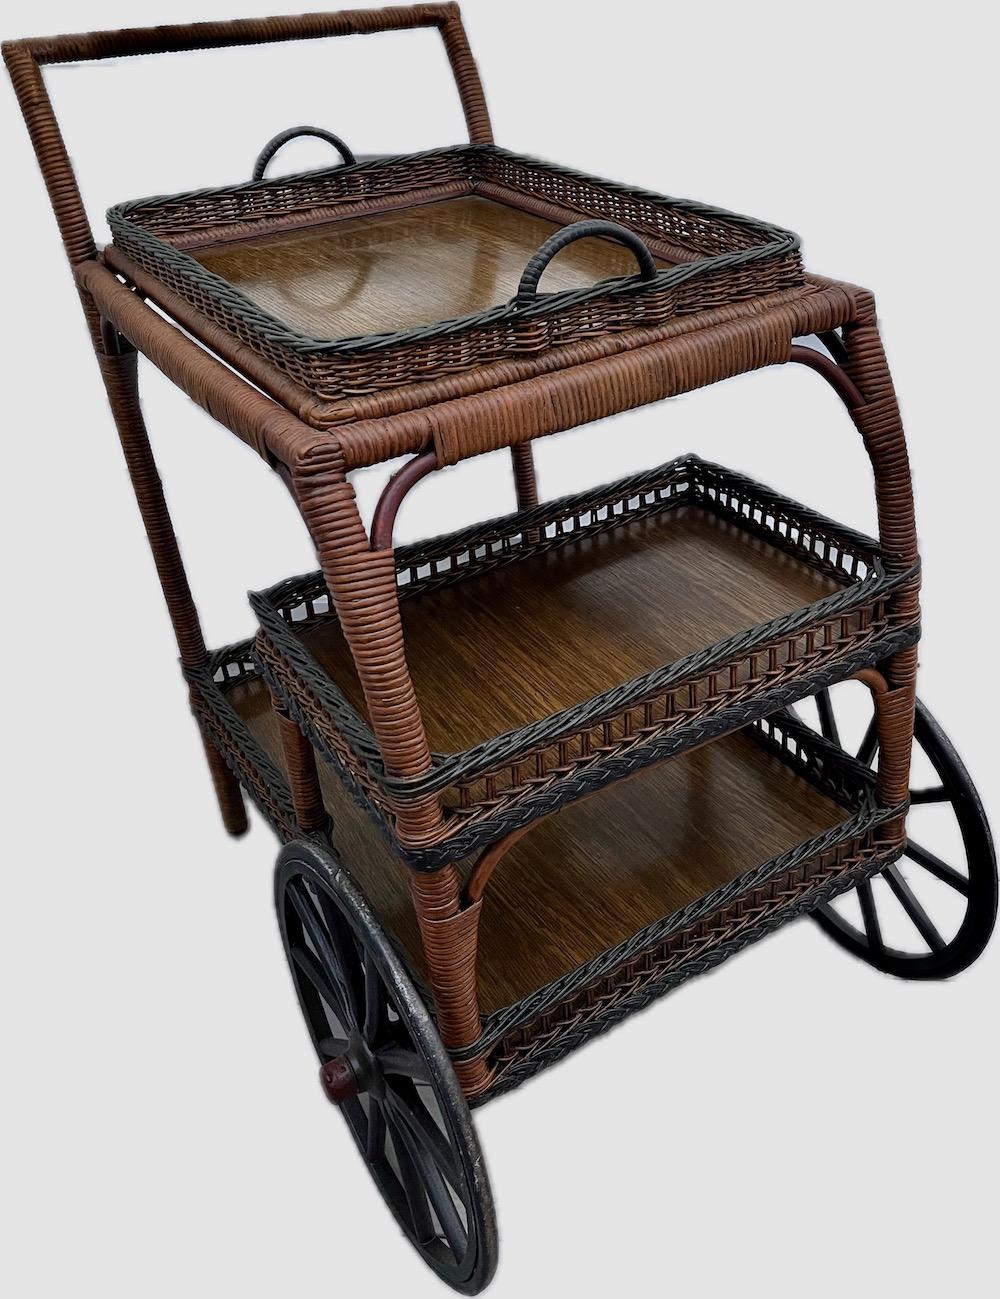 Other A Wicker Tea/Bar Cart with Serving Tray, Mid and Lower Shelf   W/ Bar Top Finish For Sale